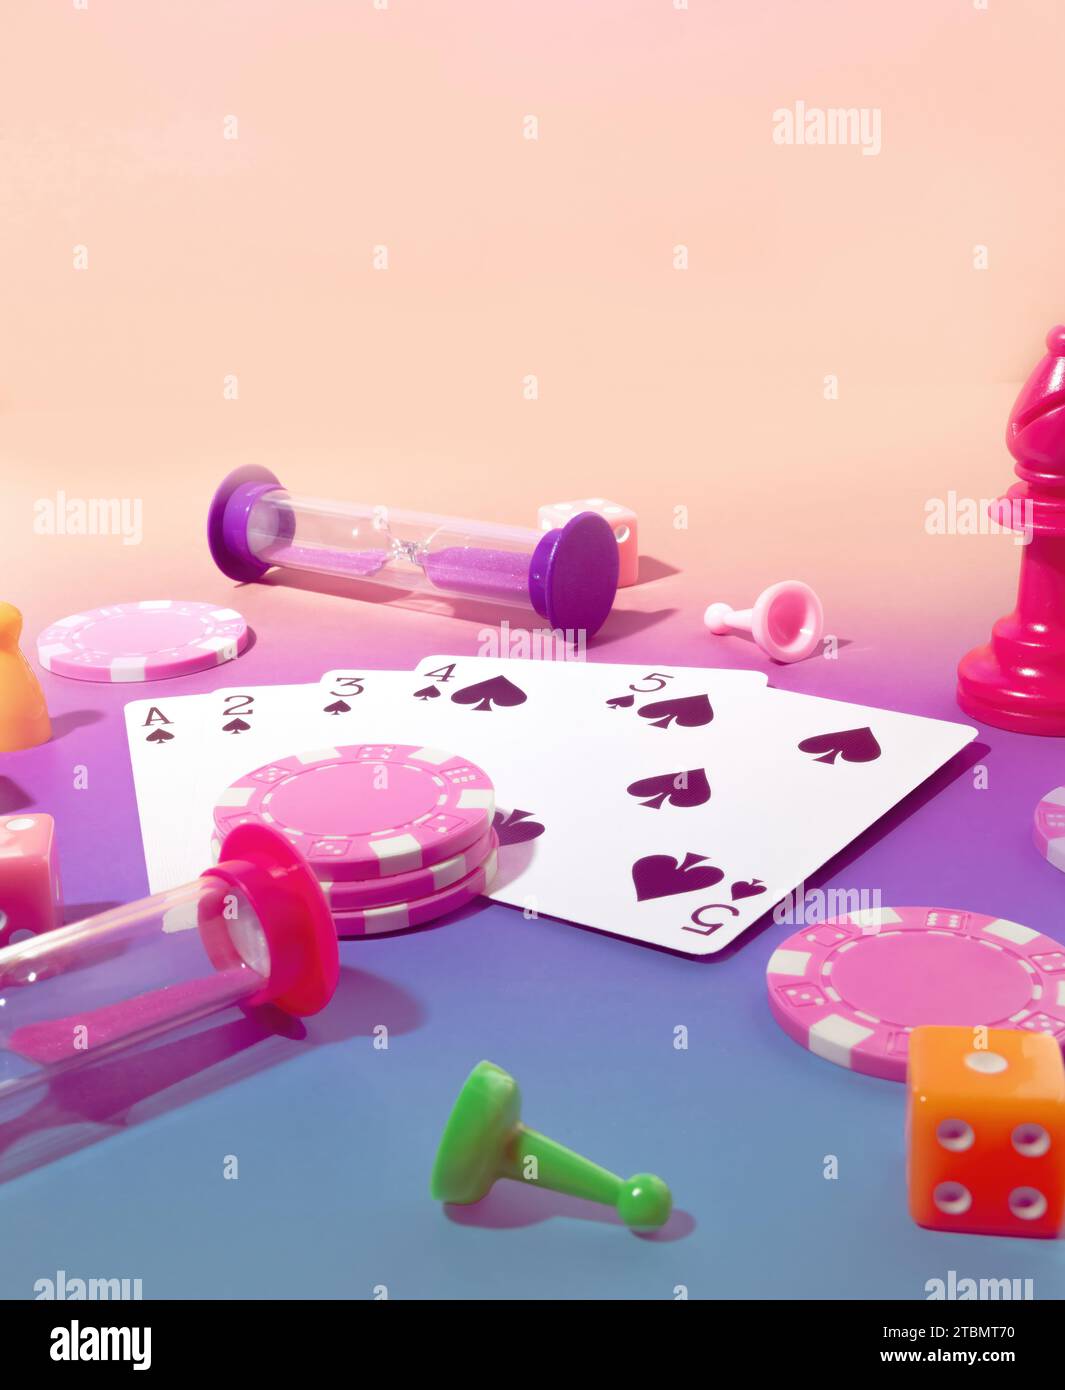 Game Scene with Poker Chips, Playing Cards, Chess Pieces, Dice, Gaming Sand Timers and Board game Pawns on a Pastel Pink & Blue Background on Stock Photo